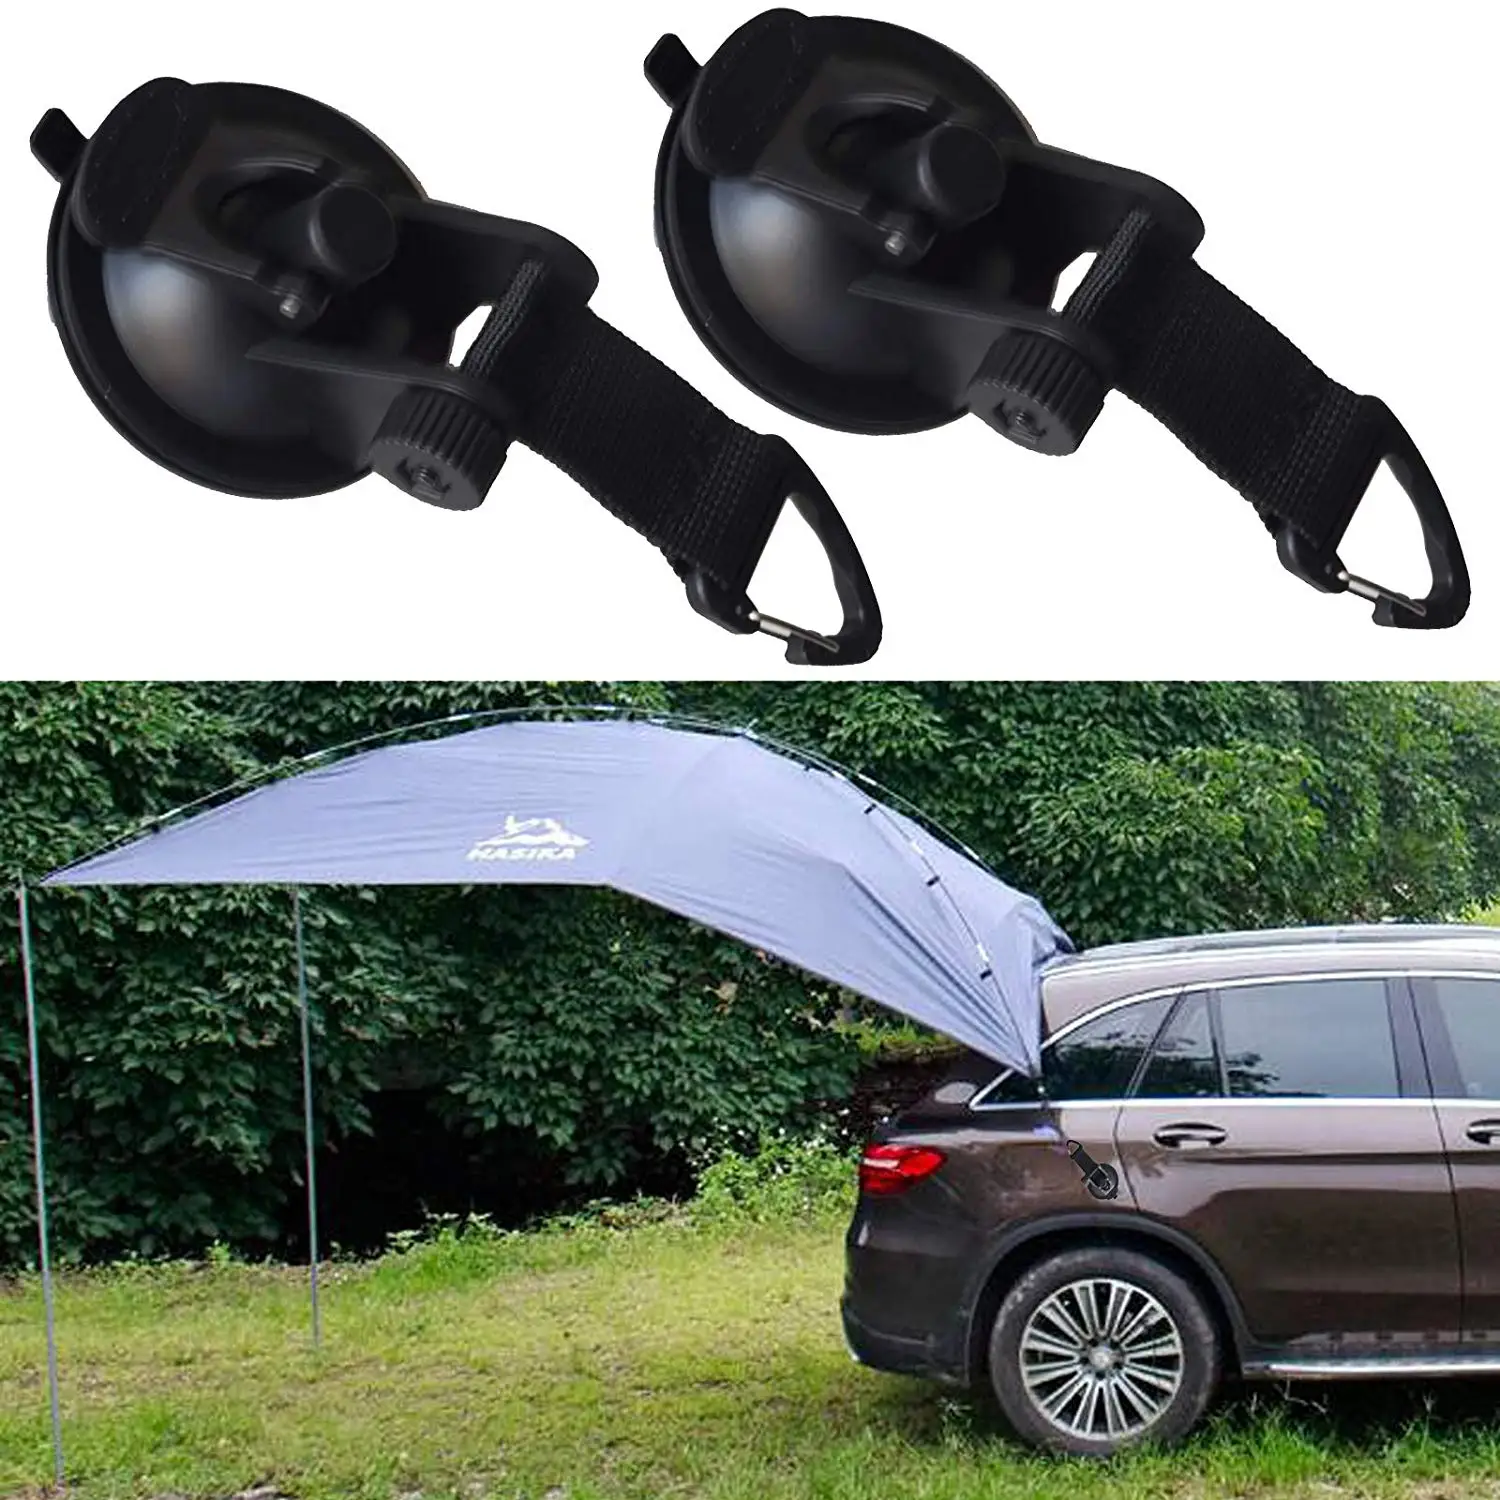 

Heavy Duty Suction Cup Anchor with Securing Hook Tie Down, Camping Tarp Accessory As Car Side Awning, Fiberglass and Epoxy SUPS